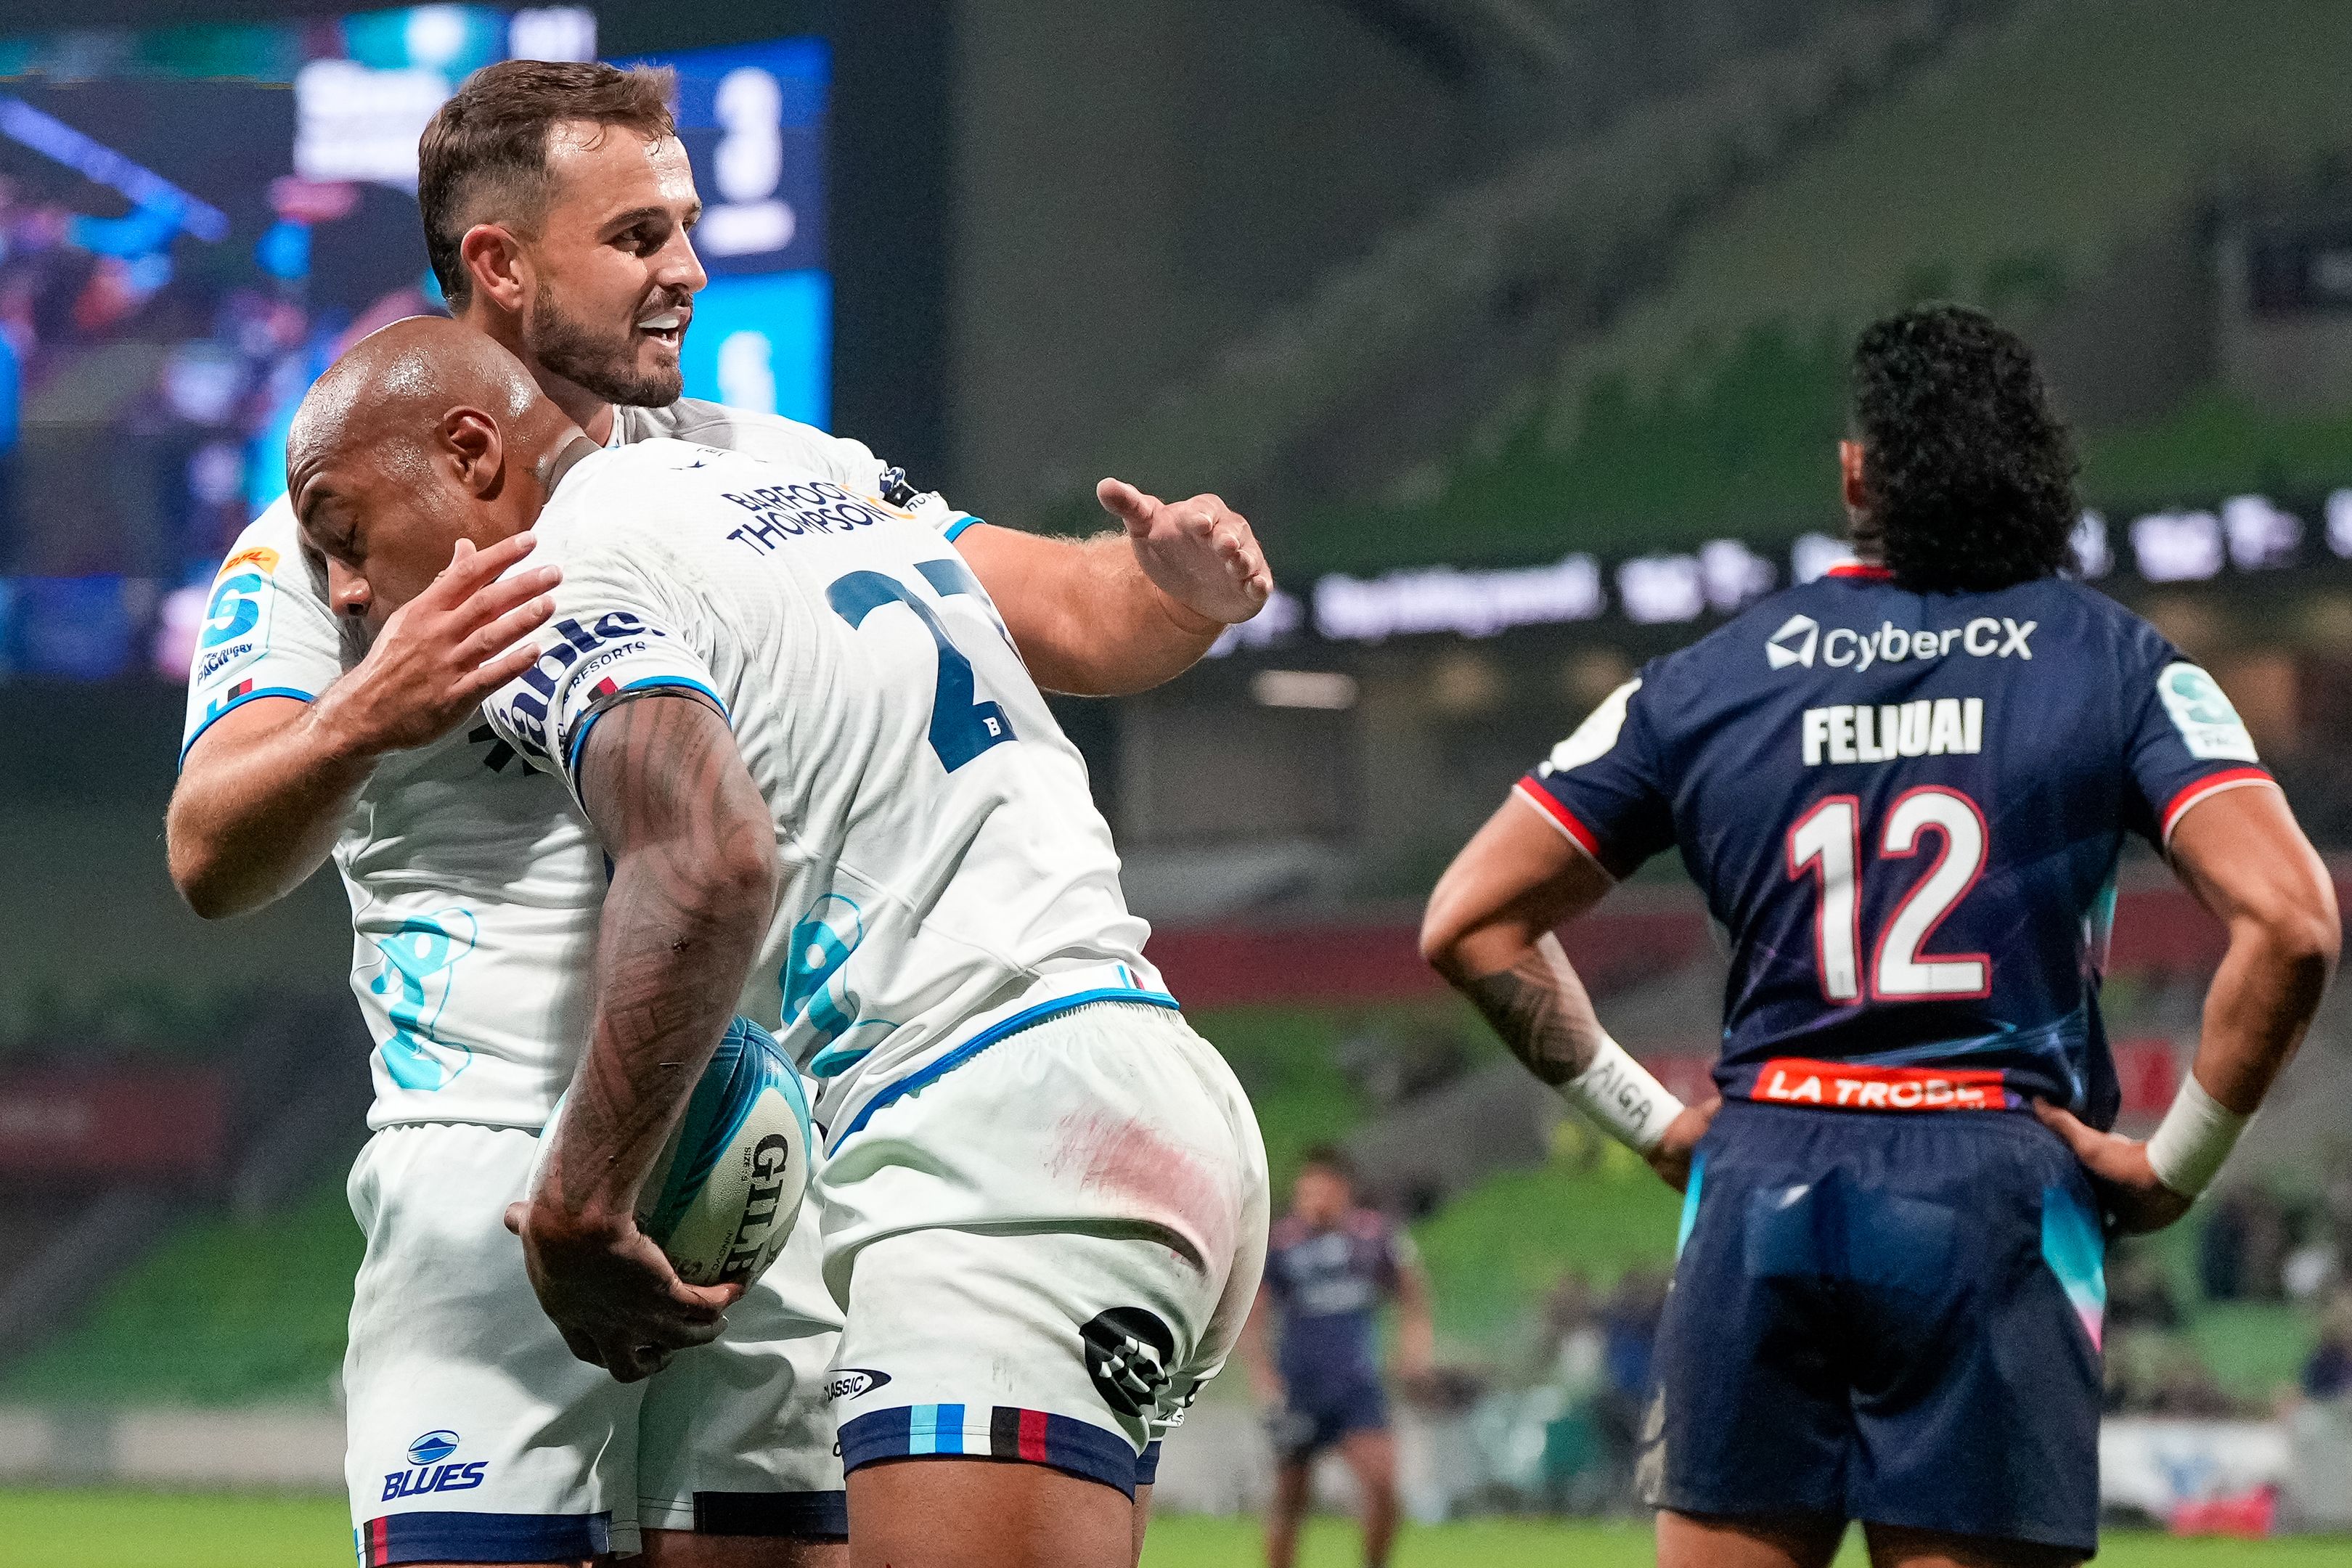 Super Rugby Pacific AS IT HAPPENED: Half-time 'rark-up' spurs Blues blitz against Rebels; Rieko Ioane 'out cold' after 'sickening' hit; Hurricanes put woeful Waratahs in a spin